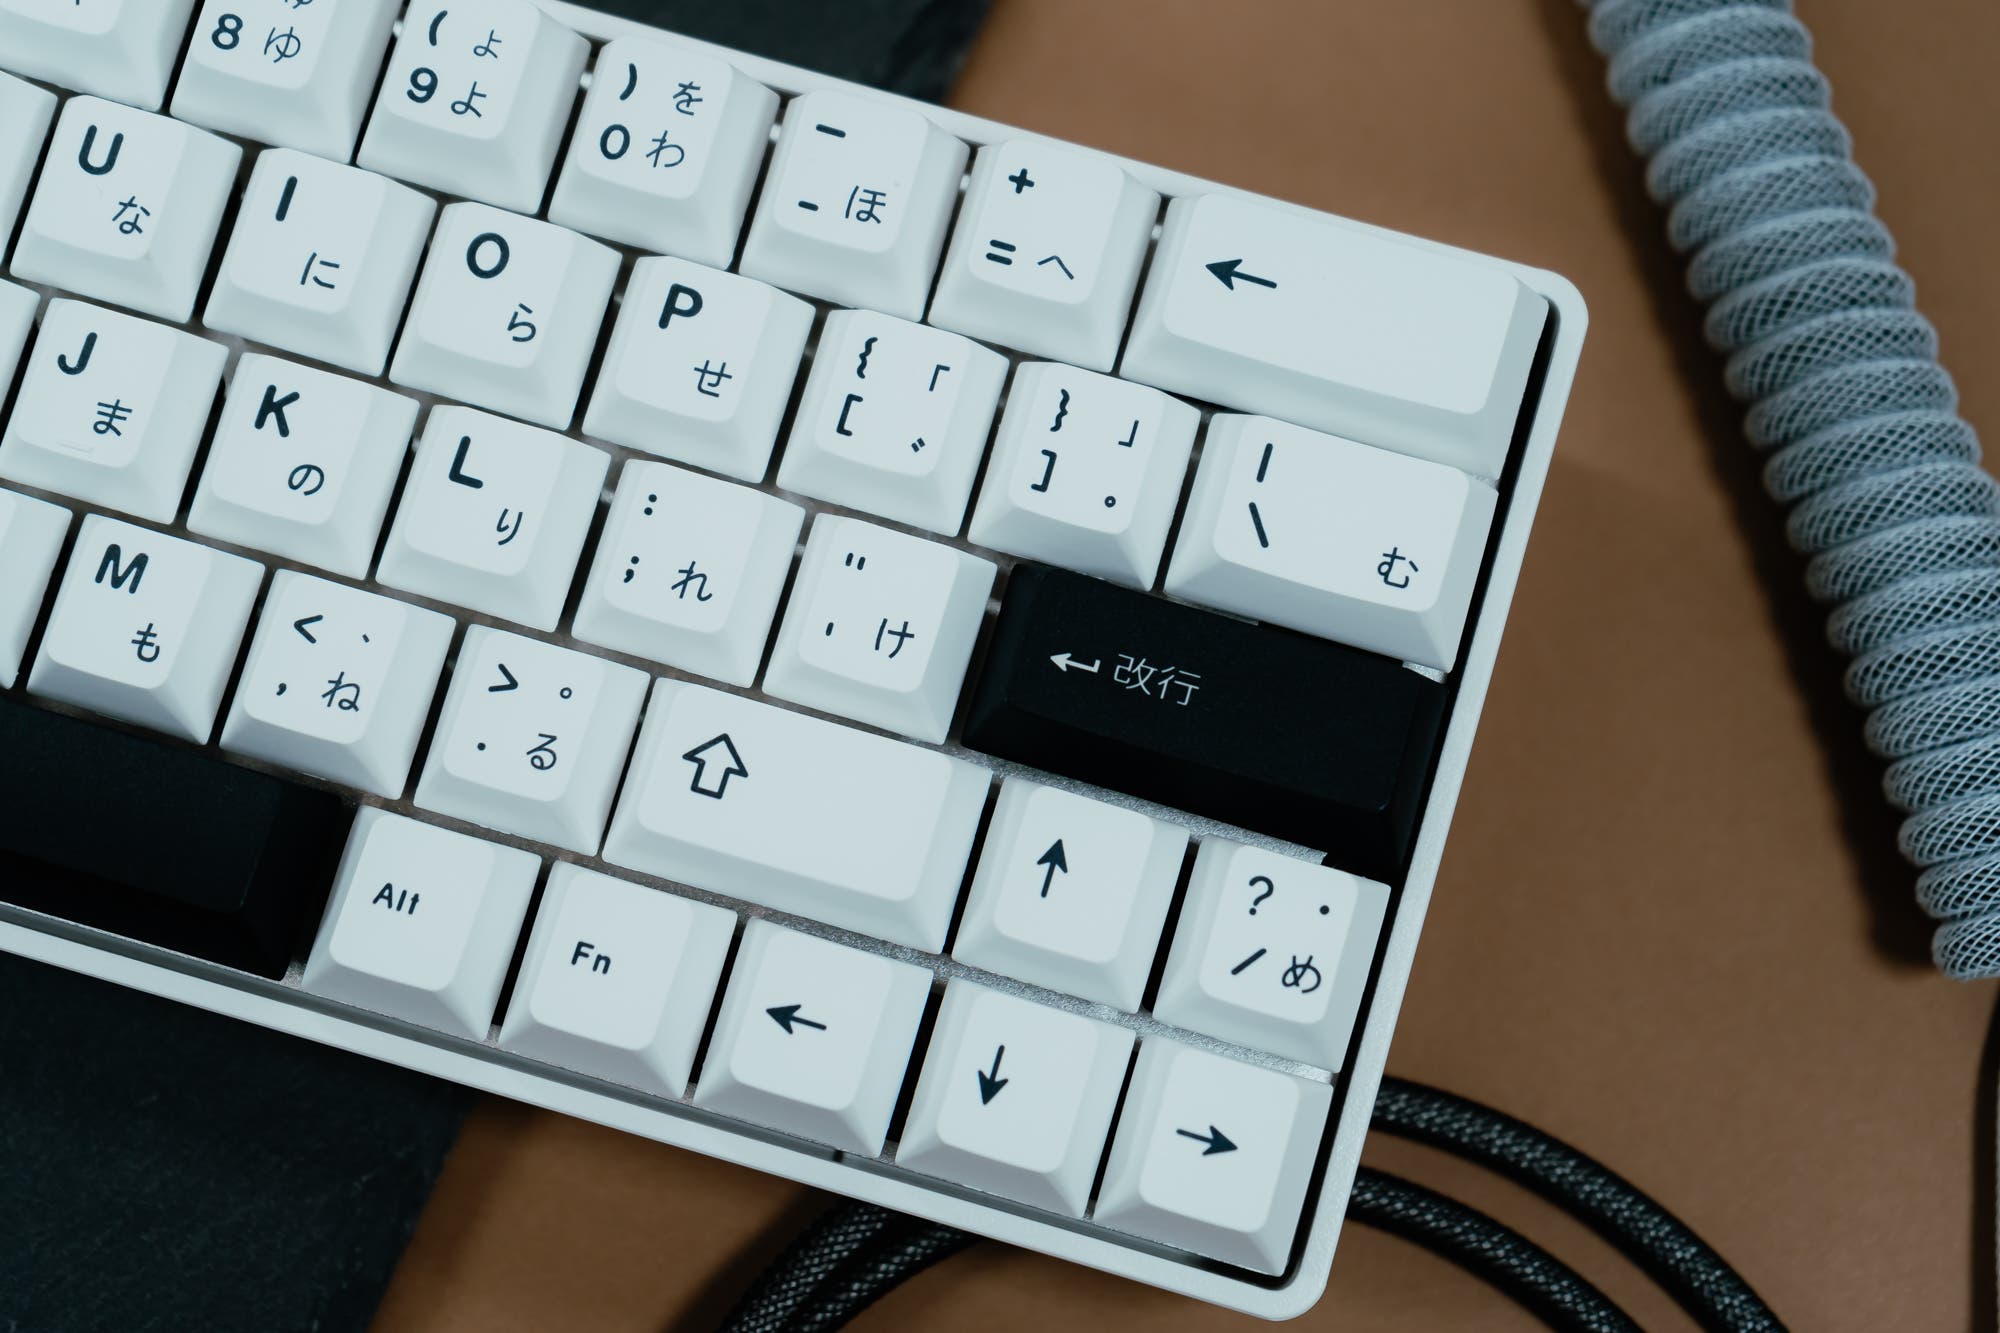 DE63 WITH JAPANESE BOW ANSI / ASSEMBLED 60% MECHANICAL KEYBOARD Gateron Pro Red 2.0 / White / Yes